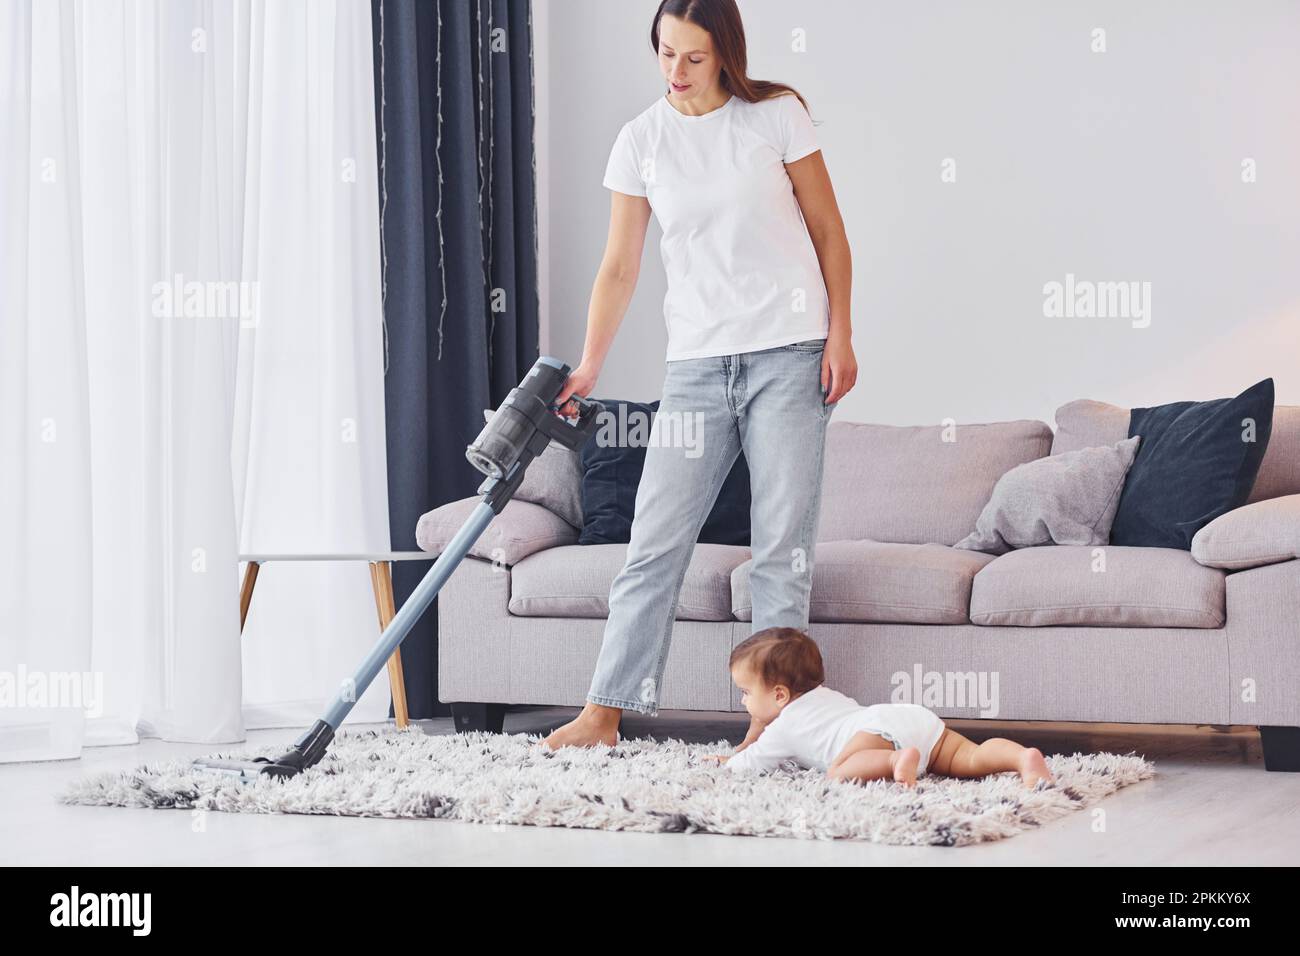 Using of the vacuum cleaner. Mother with her little daughter is indoors at home together. Stock Photo